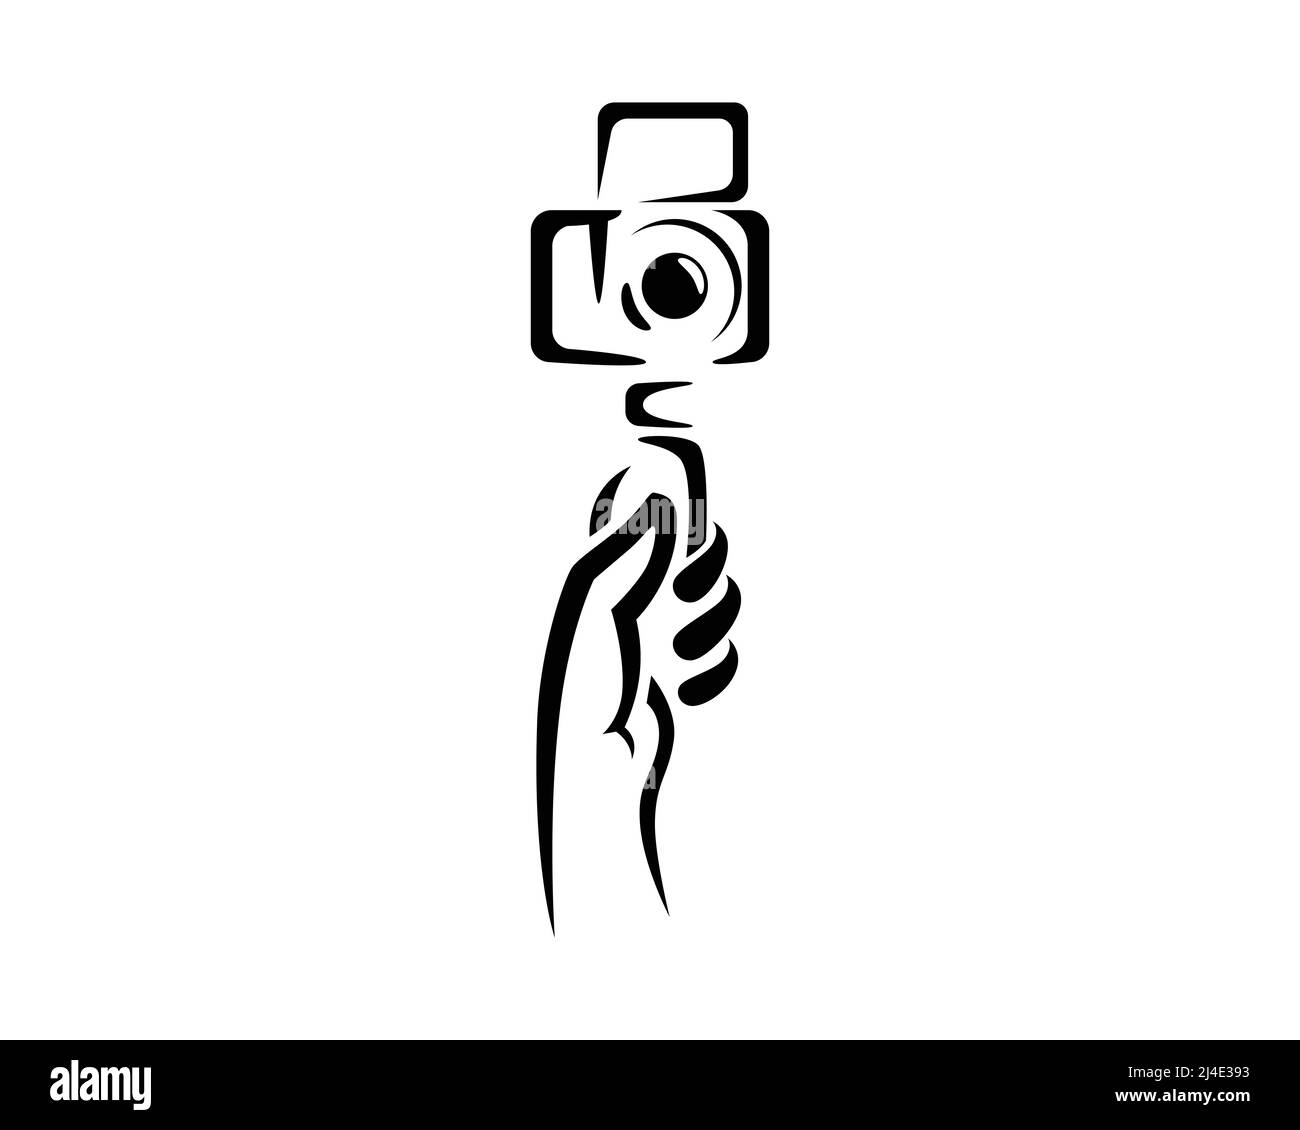 Vlogging with Hand Holding a Camera Illustration Vector Stock Vector